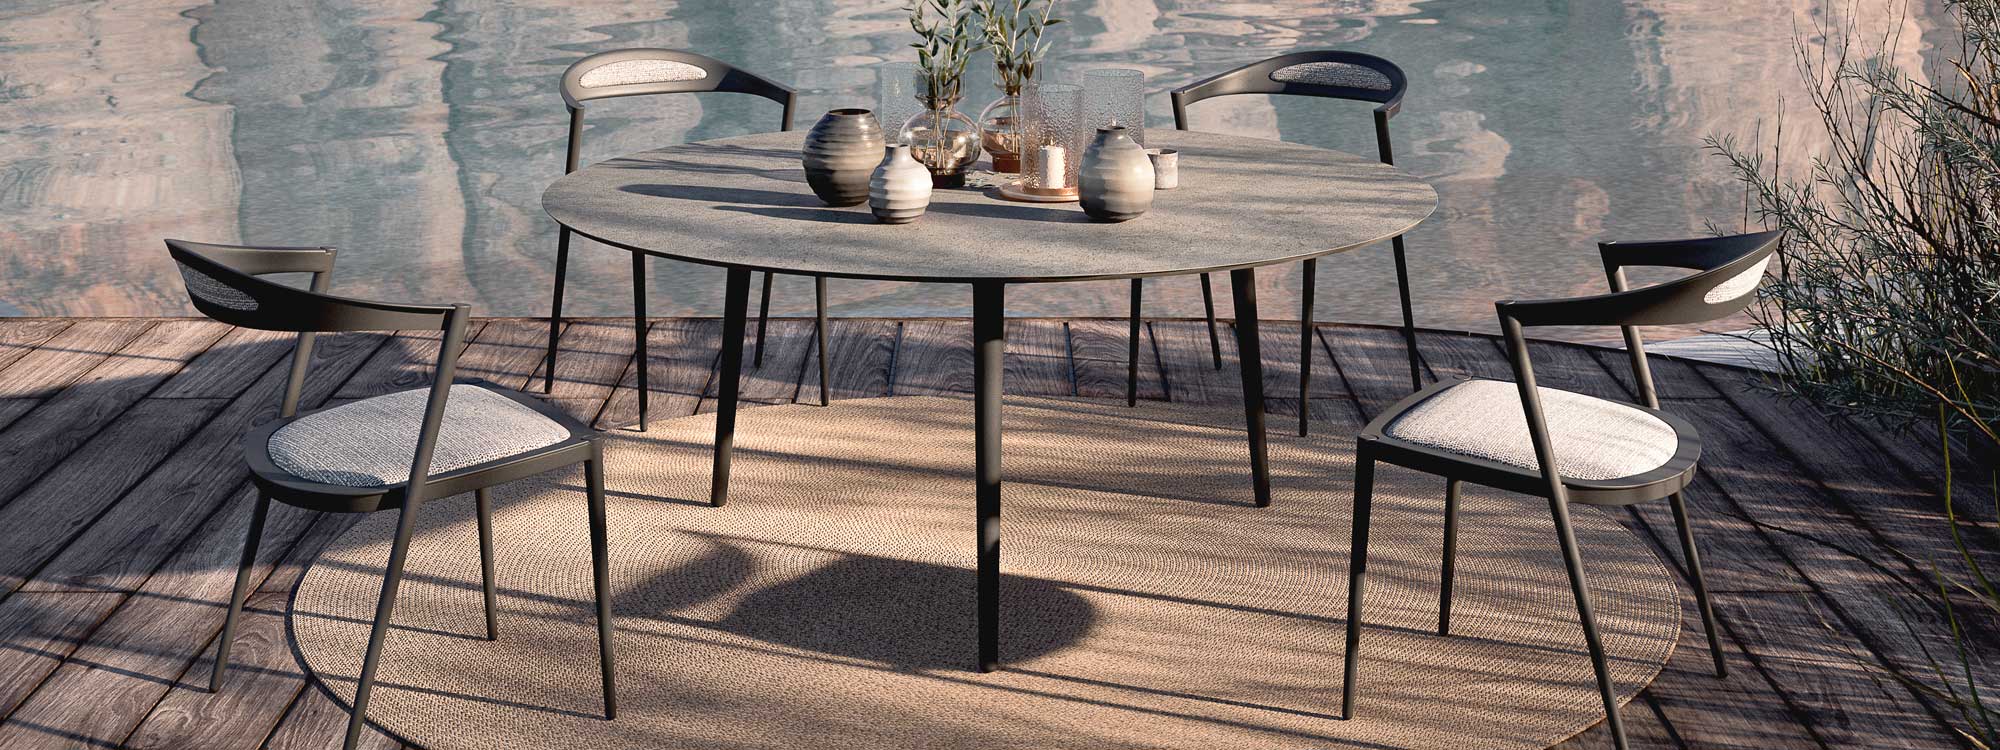 Image of Styletto circular garden table and chairs by Royal Botania